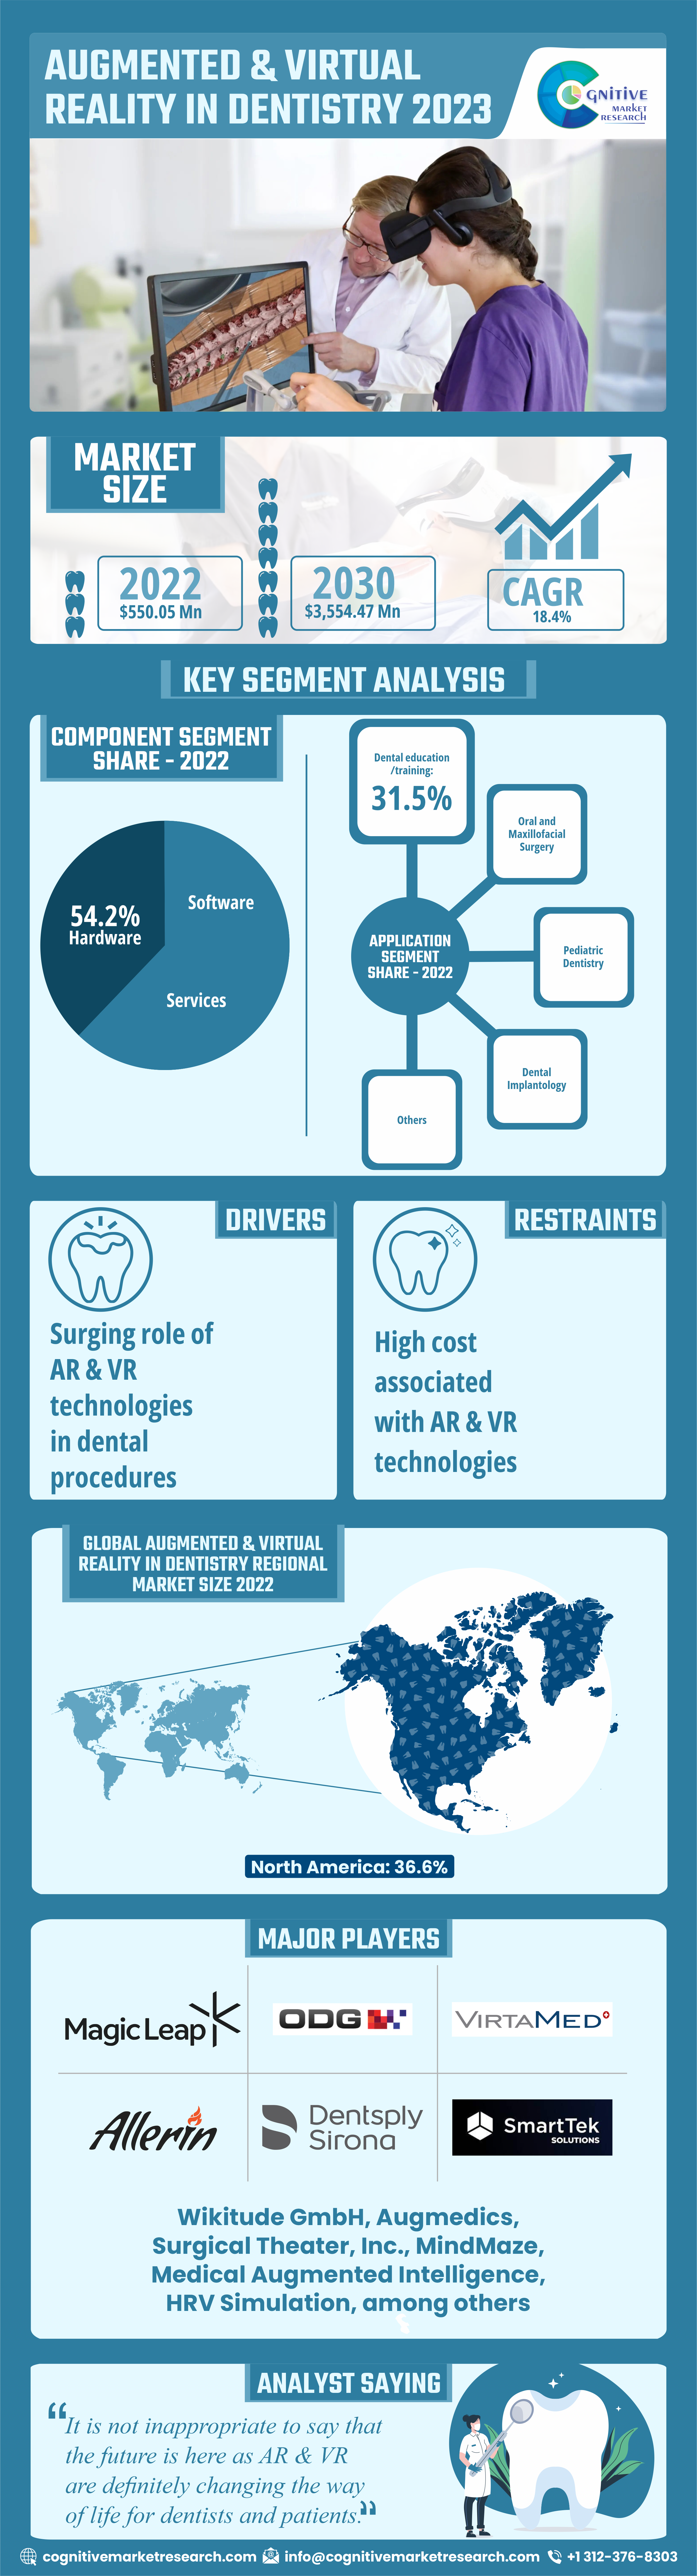 Augmented and Virtual Reality in Dentistry Market Size to Reach $3,554.5 Million by 2030!